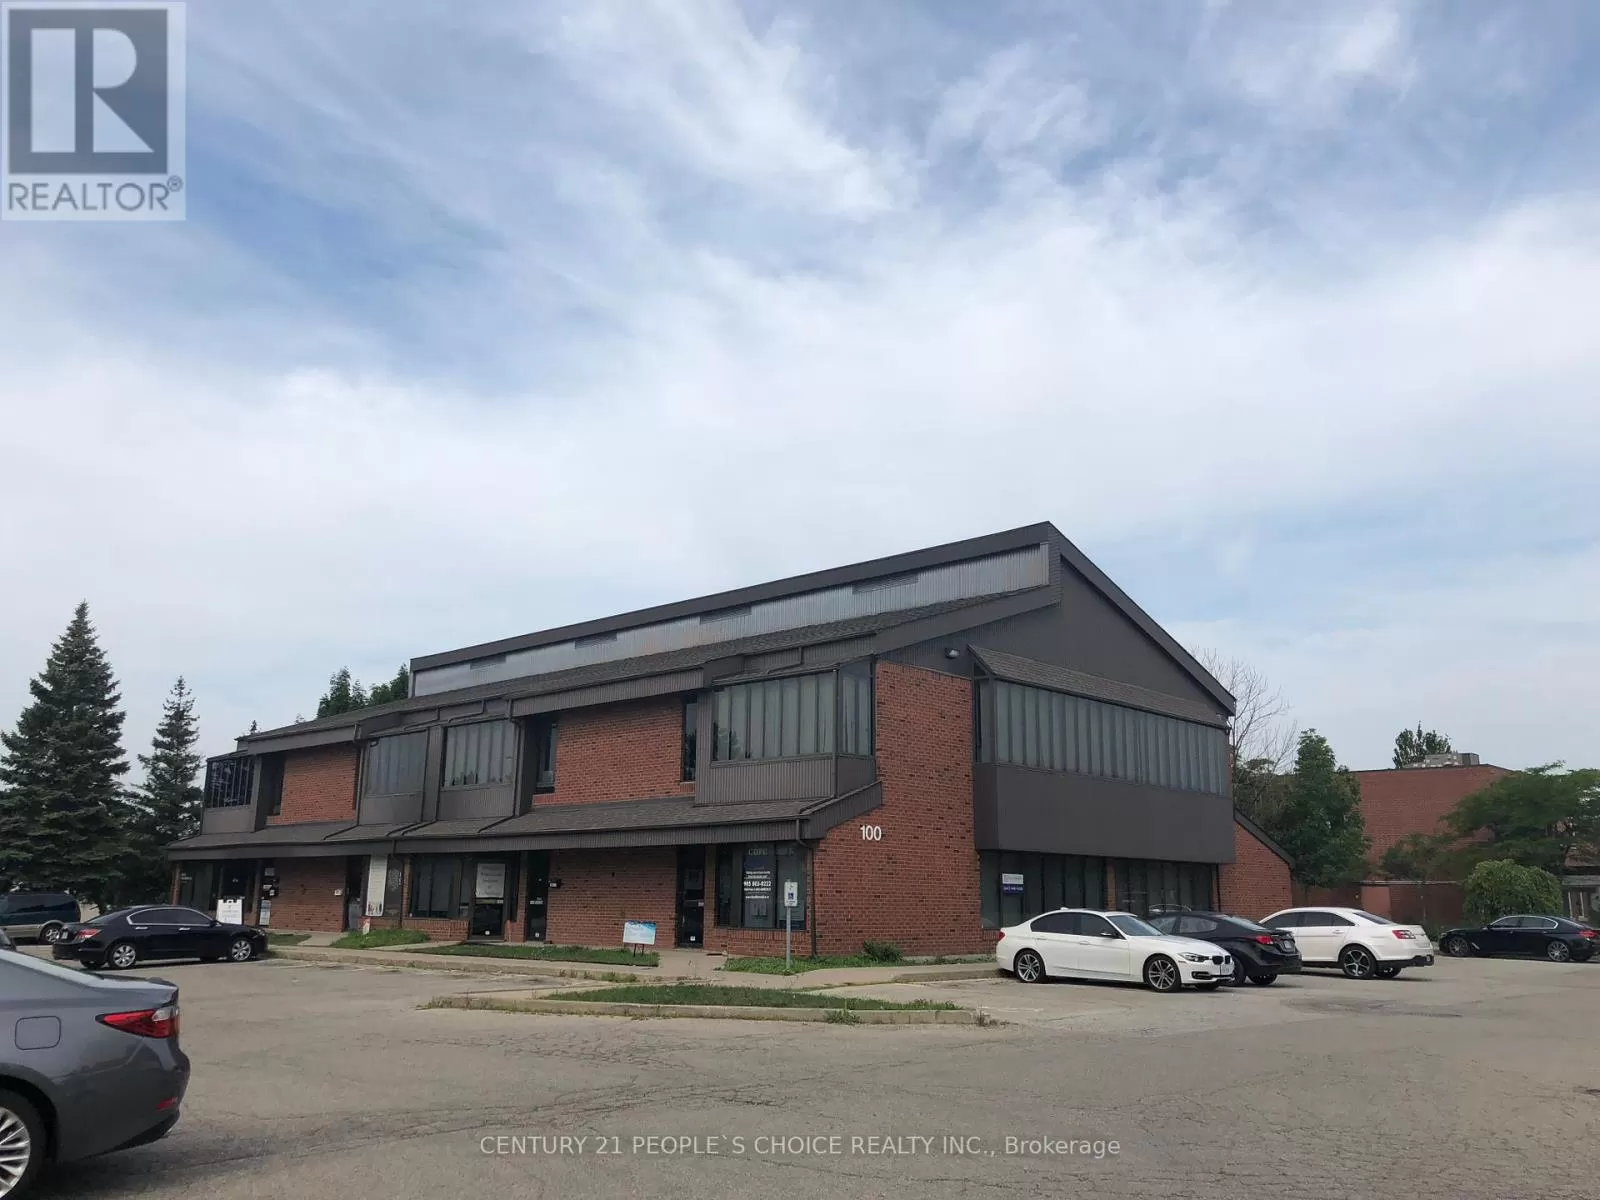 Offices for rent: 202 - 120 Matheson Boulevard E, Mississauga, Ontario L4Z 1X1